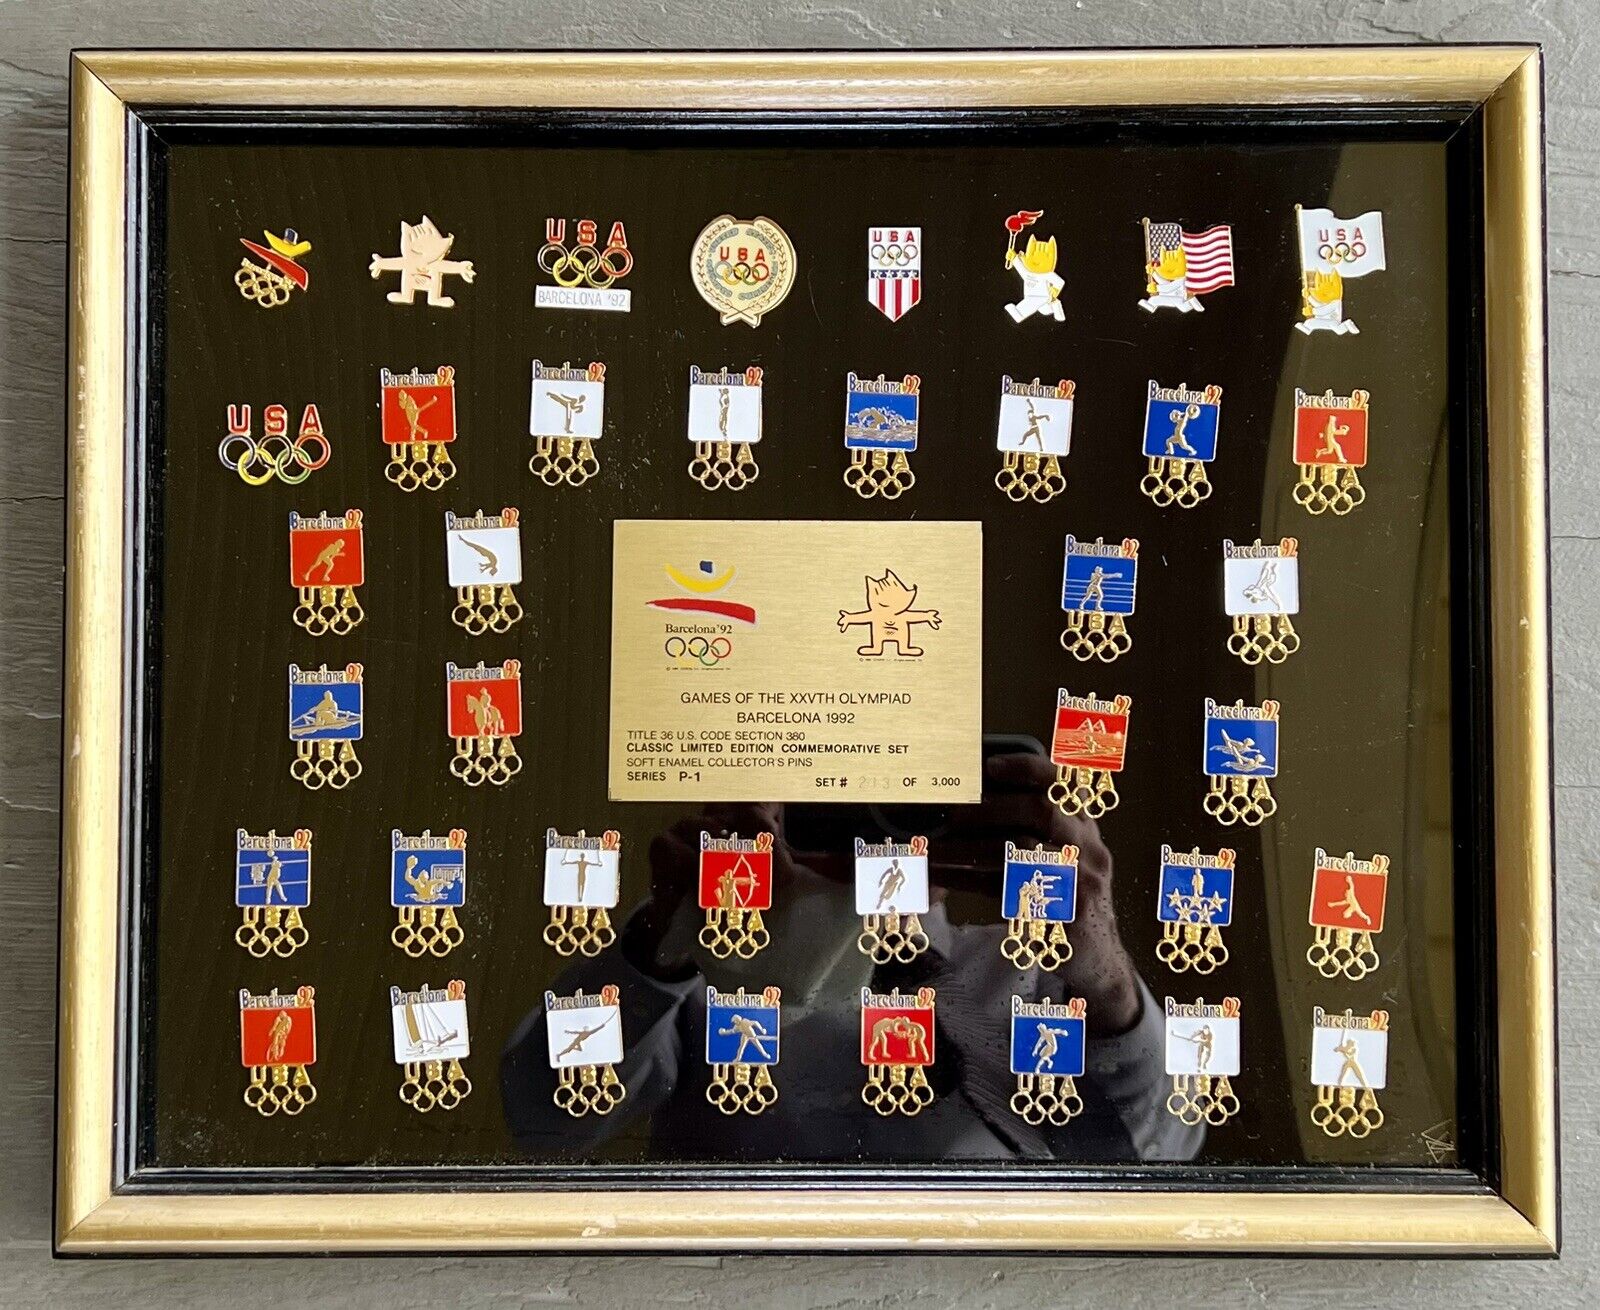 USA TEAM BARCELONA 1992 OLYMPIC GAMES 40 OLYMPIAD CONI  PIN COLLECTION framed